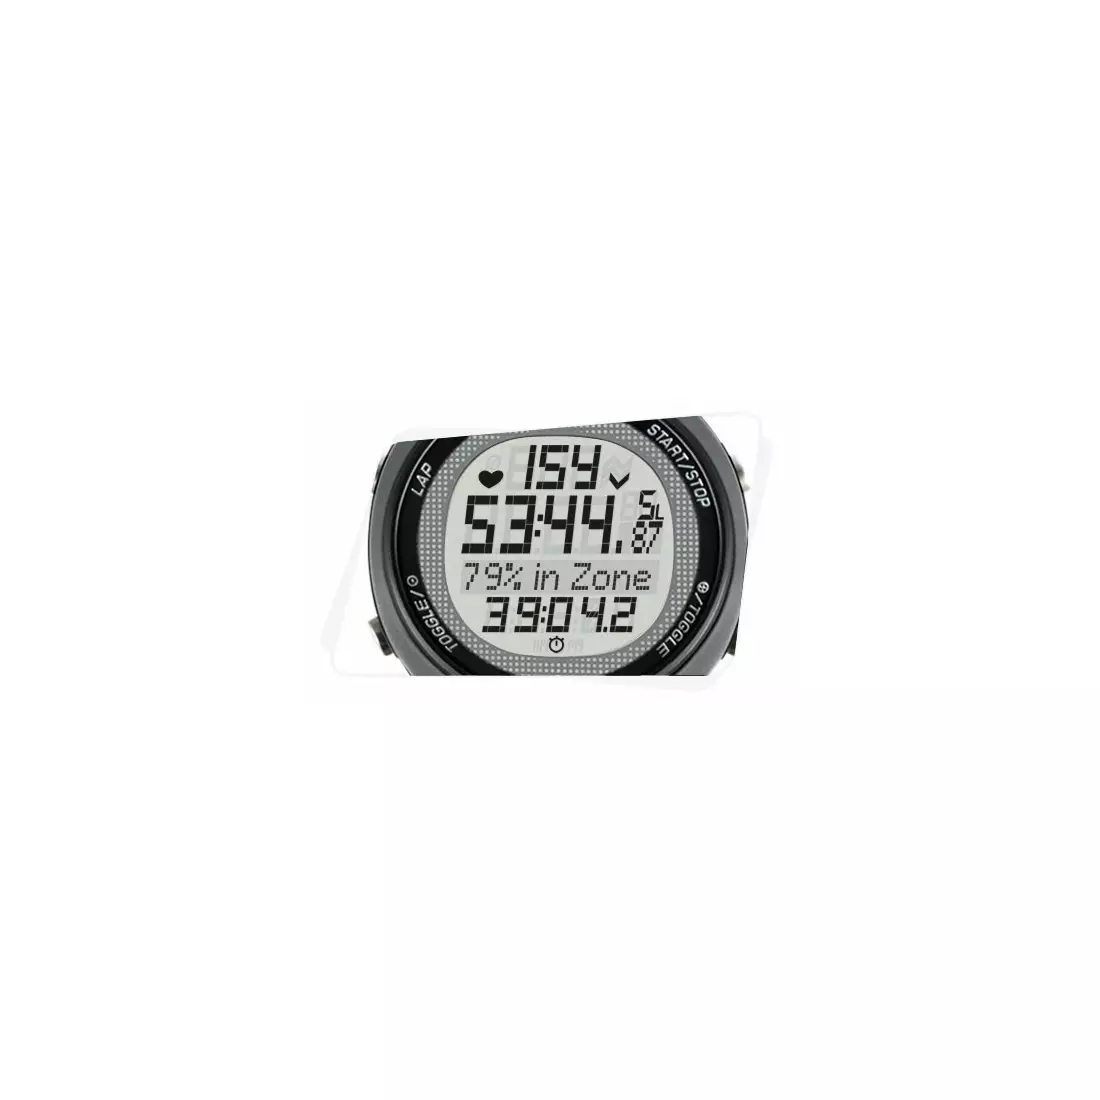 SIGMA 15.11 heart rate monitor with a band, red